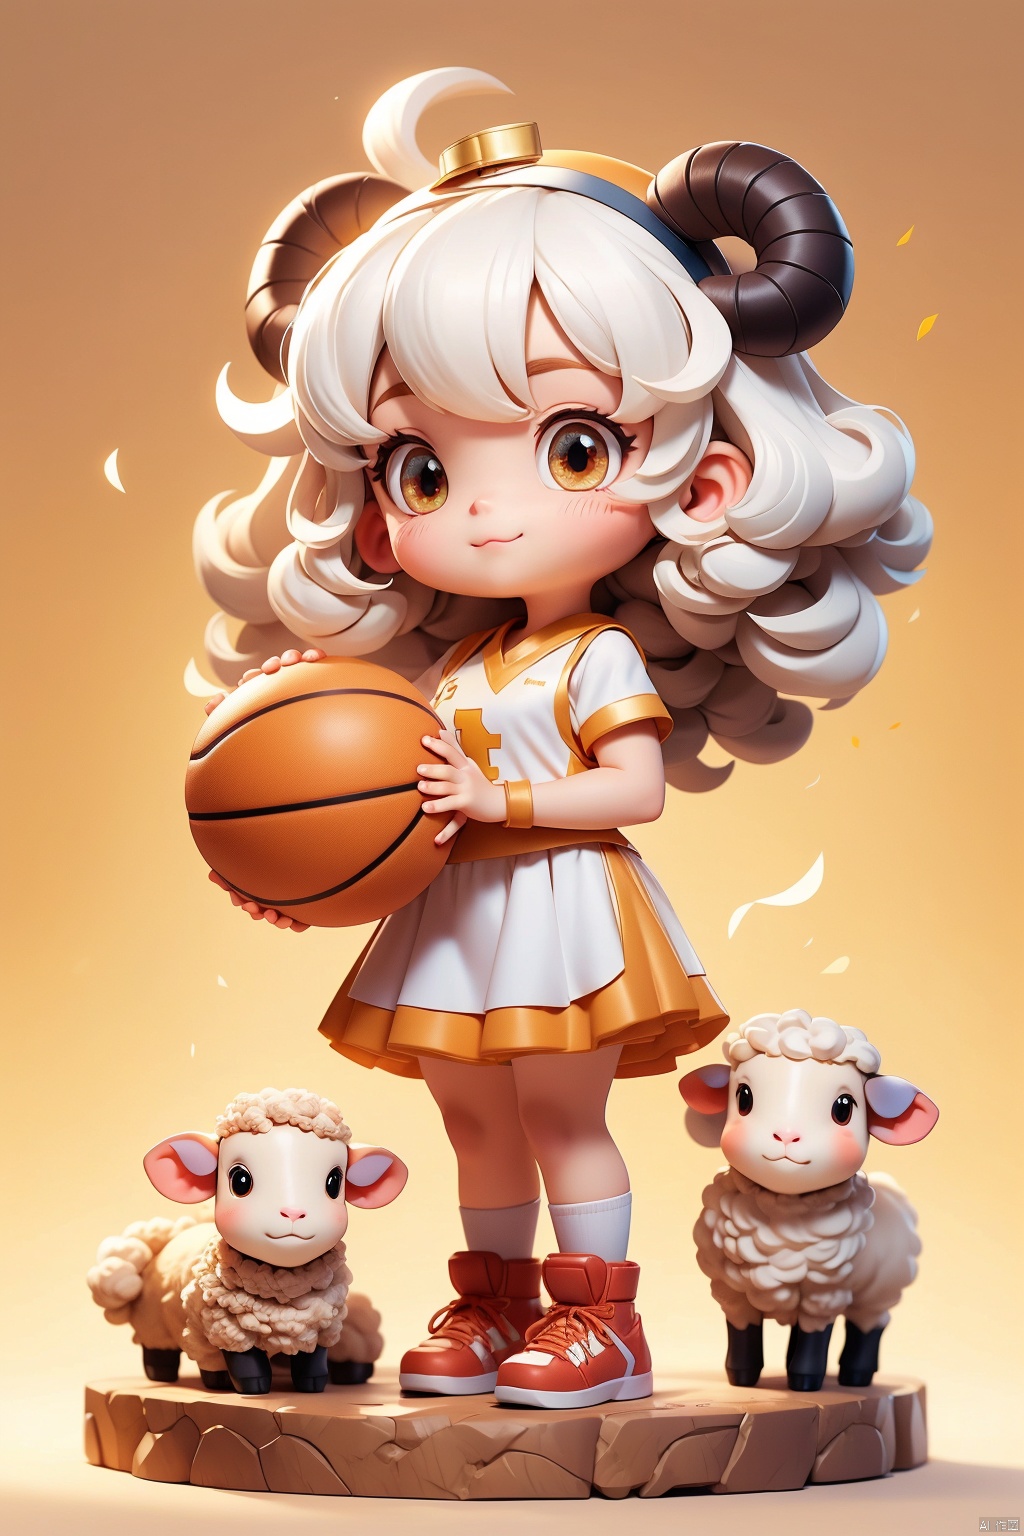 1 girl, (3 years :1.9), solo, (Q version :1.6), IP, determined expression, sheep horns, animal features, blush, basketball uniform, simple white background, white hair, sheep curls, hands crossed